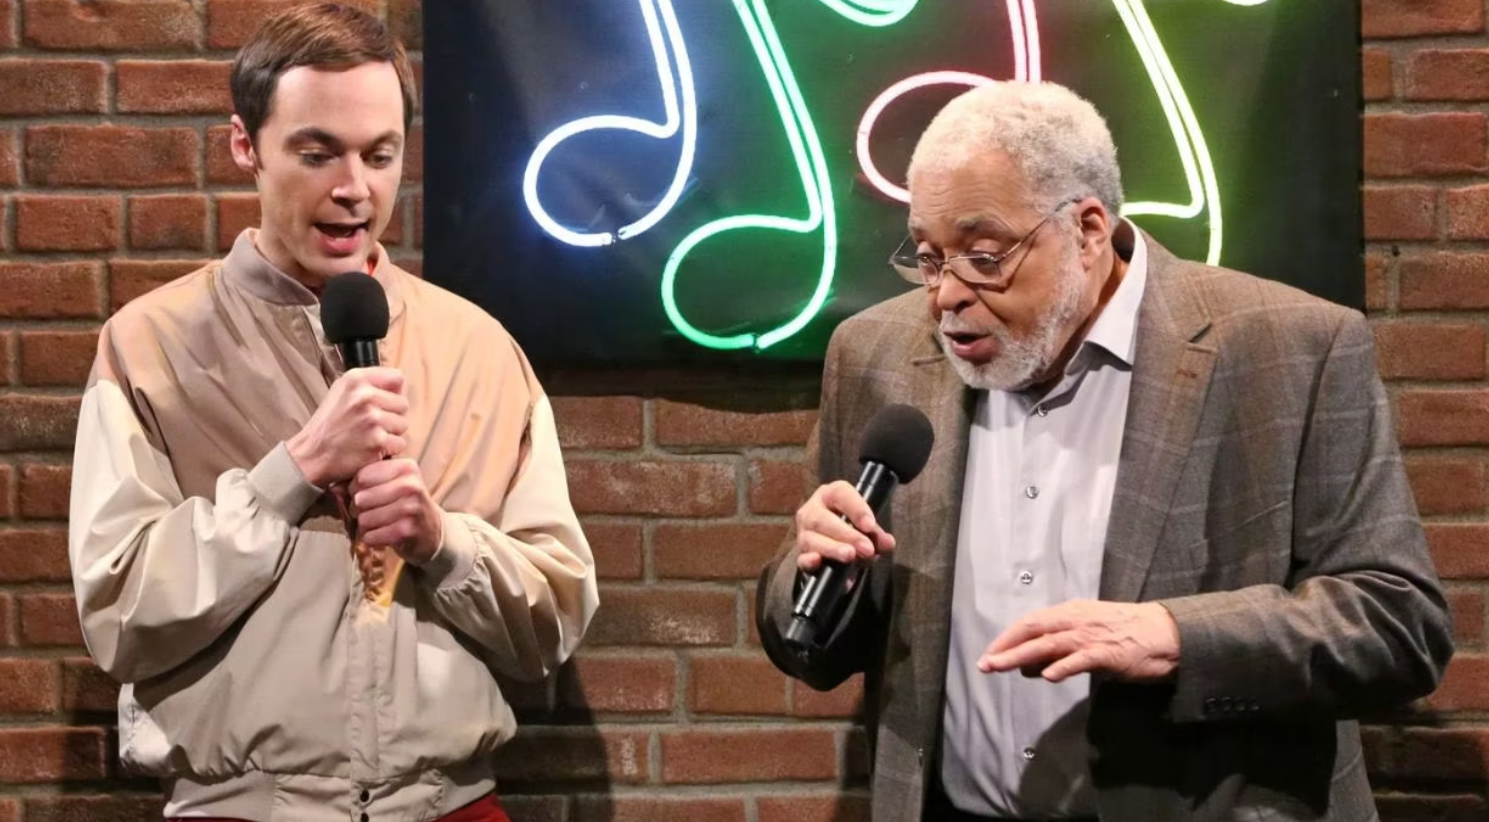 Jim Parsons and James Earl Jones in The Big Bang Theory